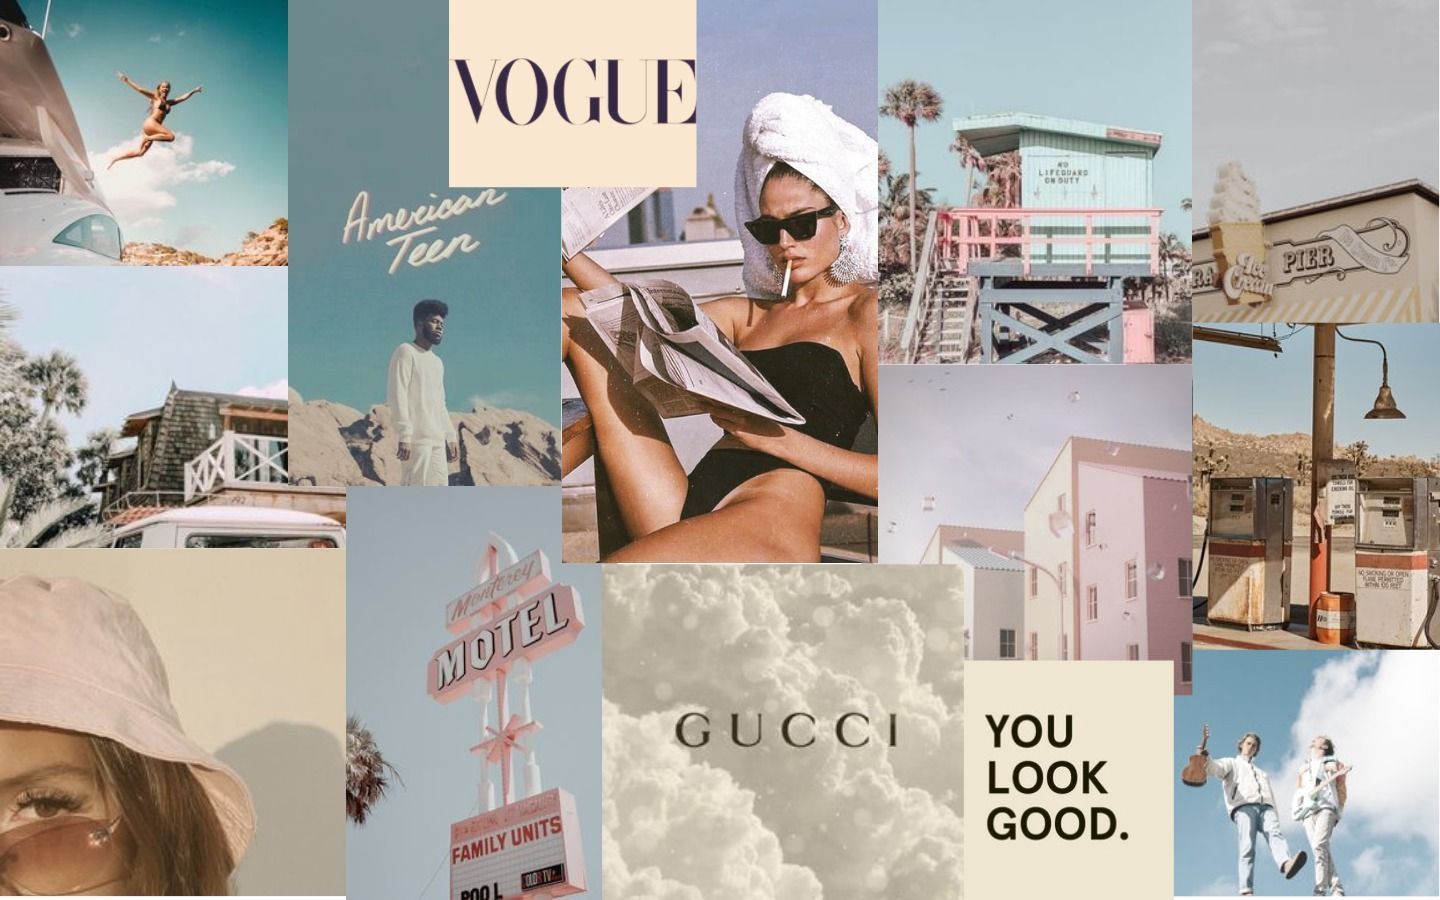 A collage of photos of a woman, a motel sign, a Vogue magazine, and a Gucci sign. - MacBook